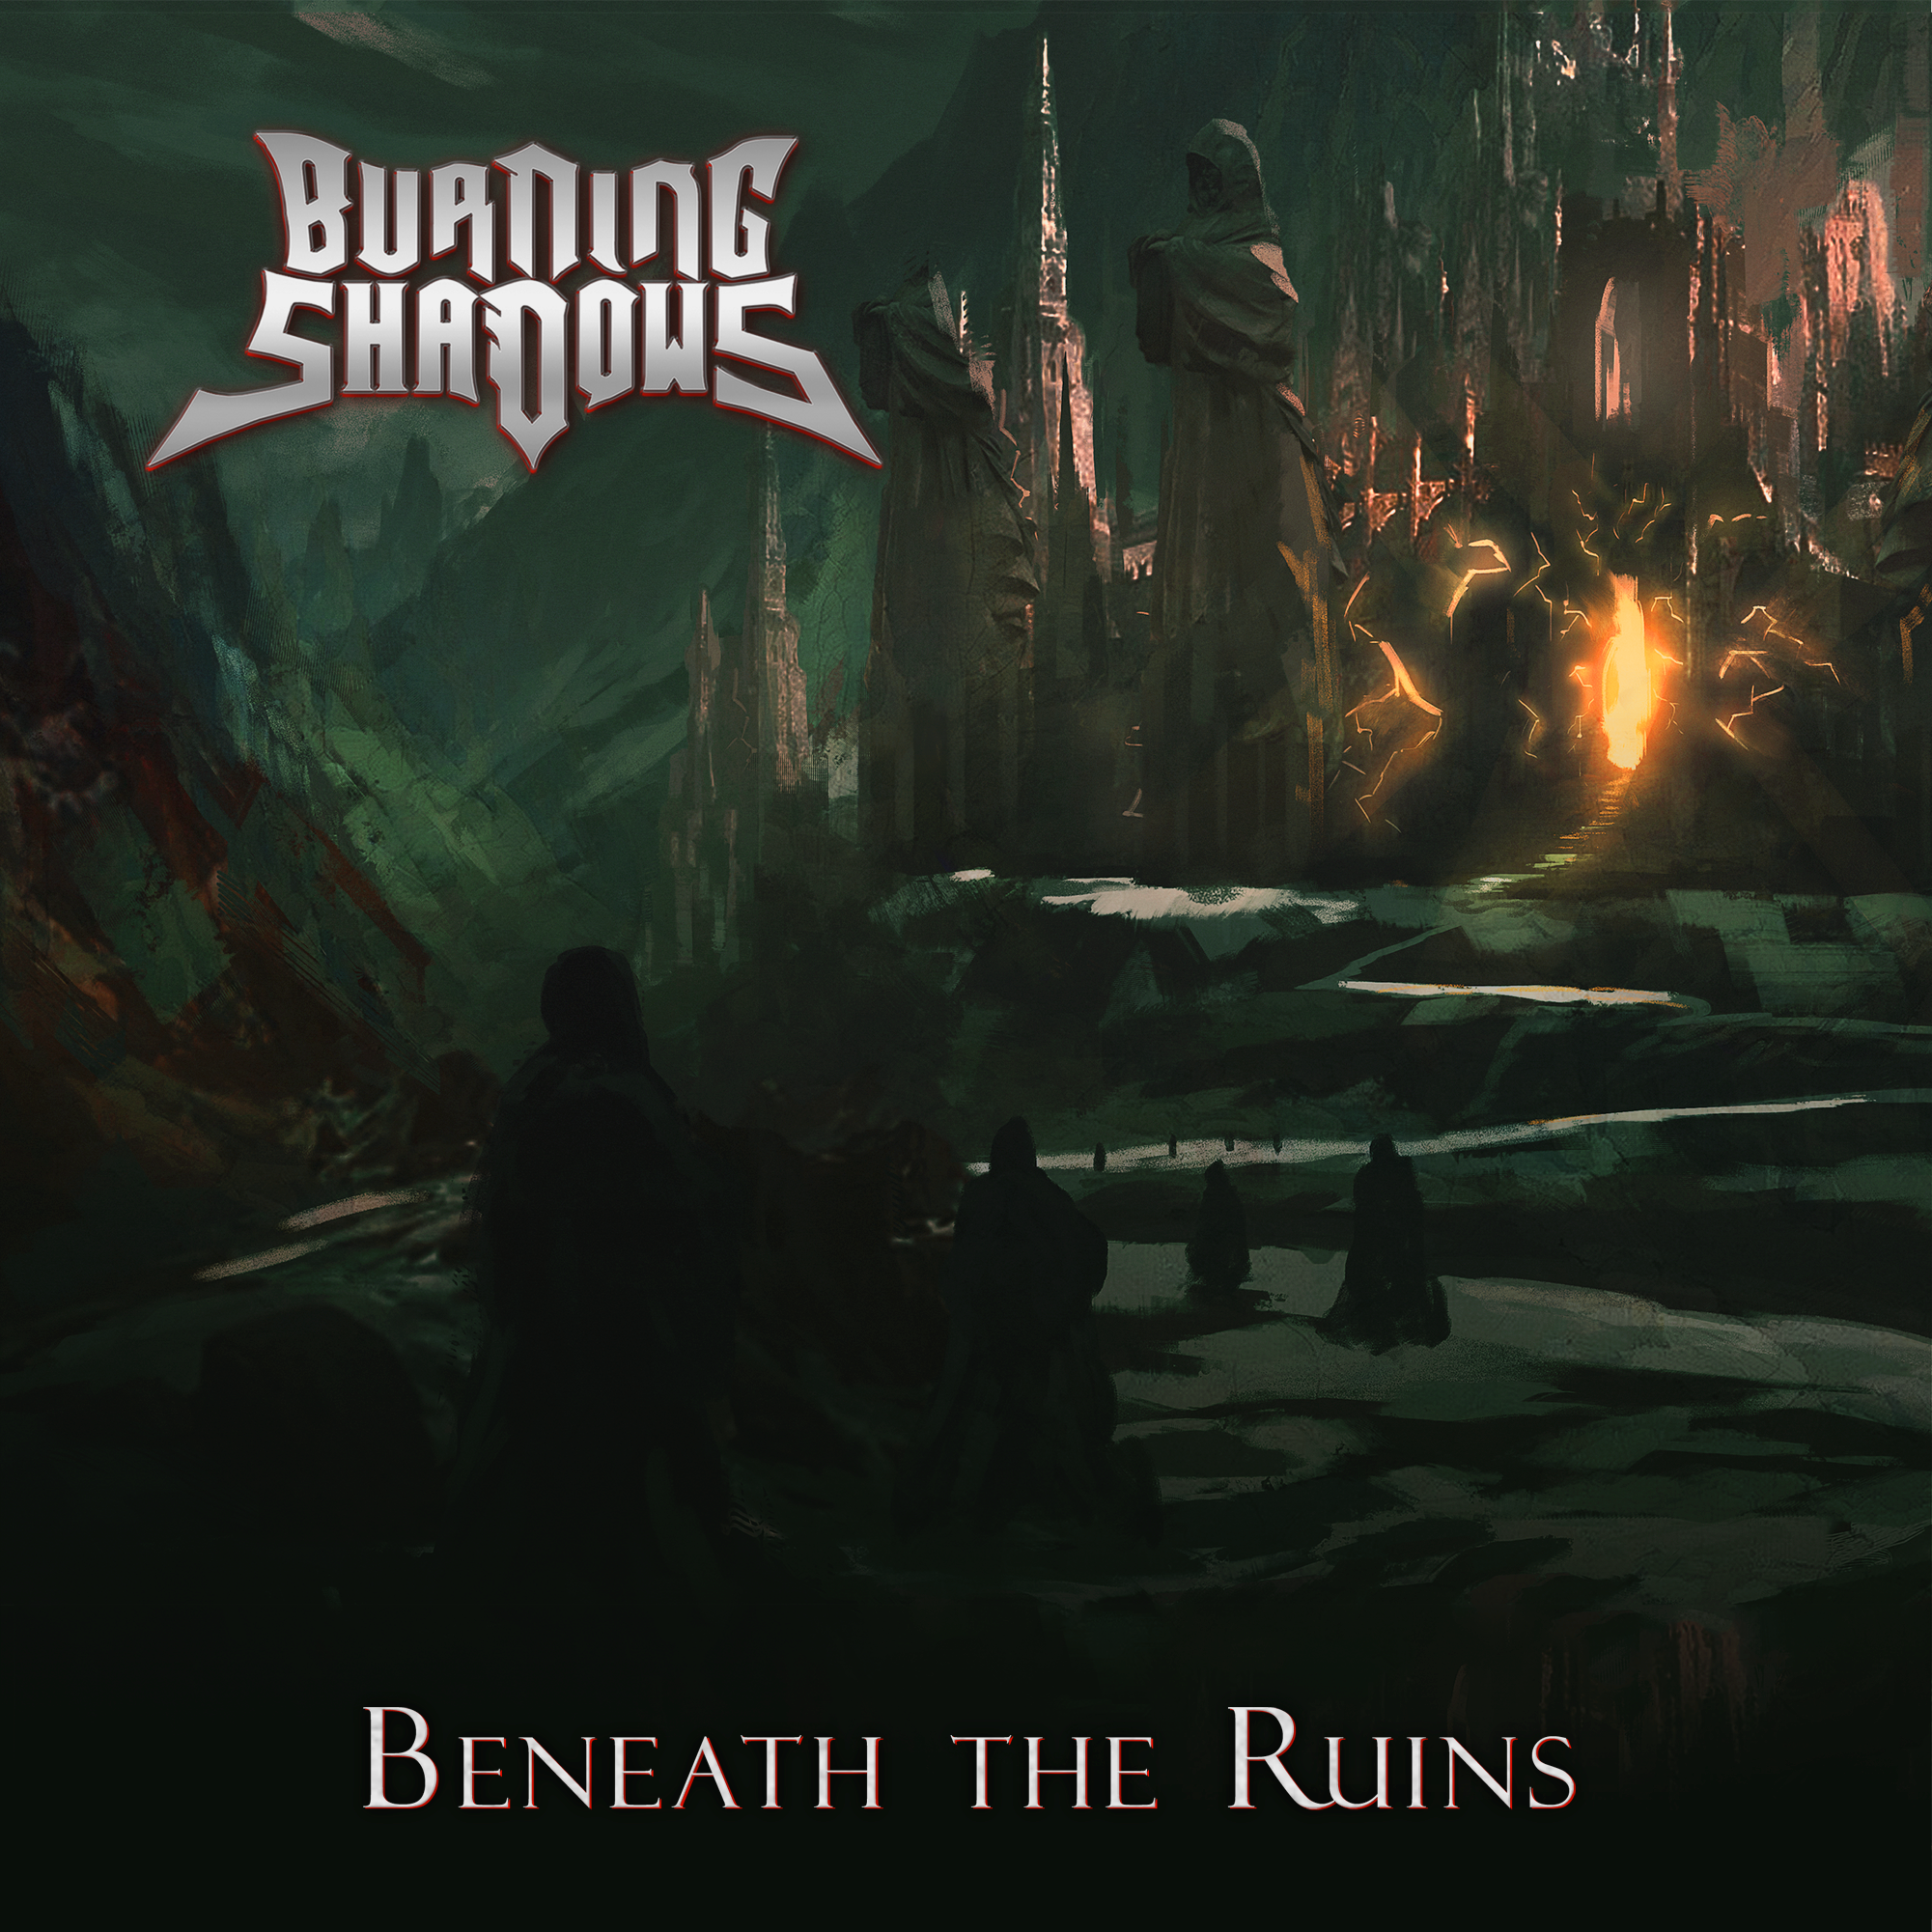 BURNING SHADOWS returns with their fifth EP, Beneath the Ruins